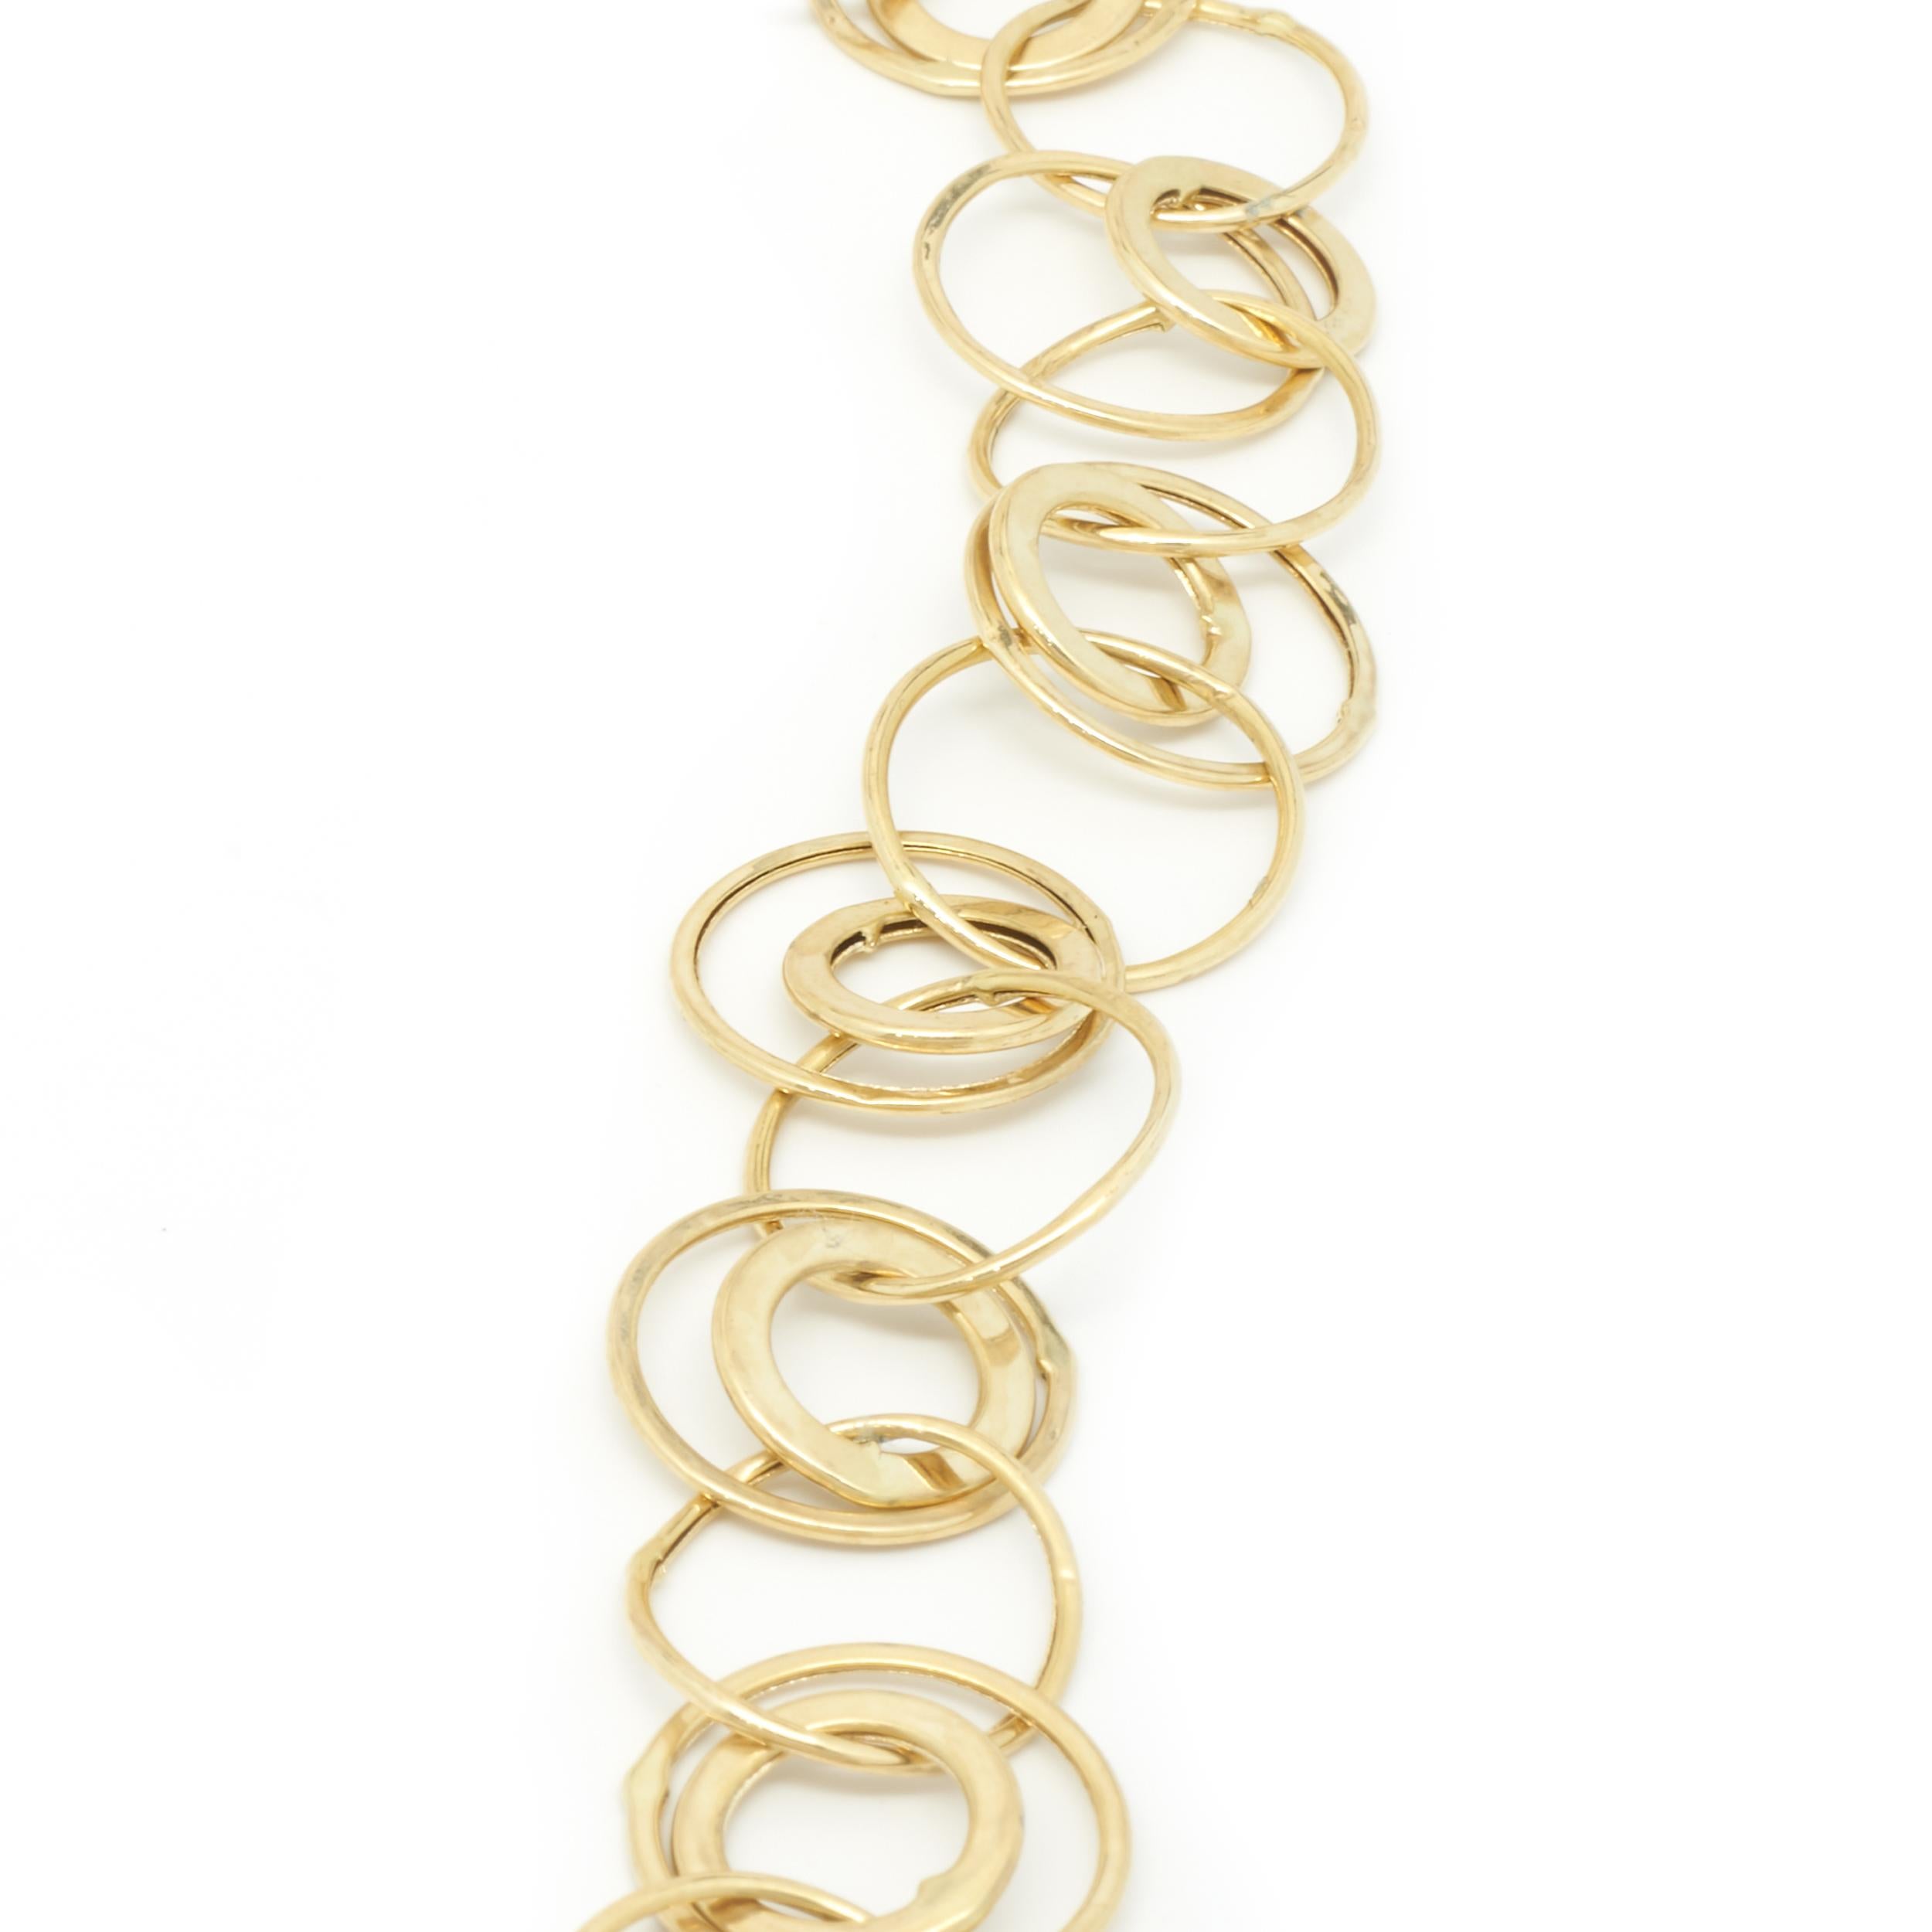 Designer: custom
Material: 14K yellow gold
Dimensions: necklace measures 16-inches
Weight: 10.00 grams
